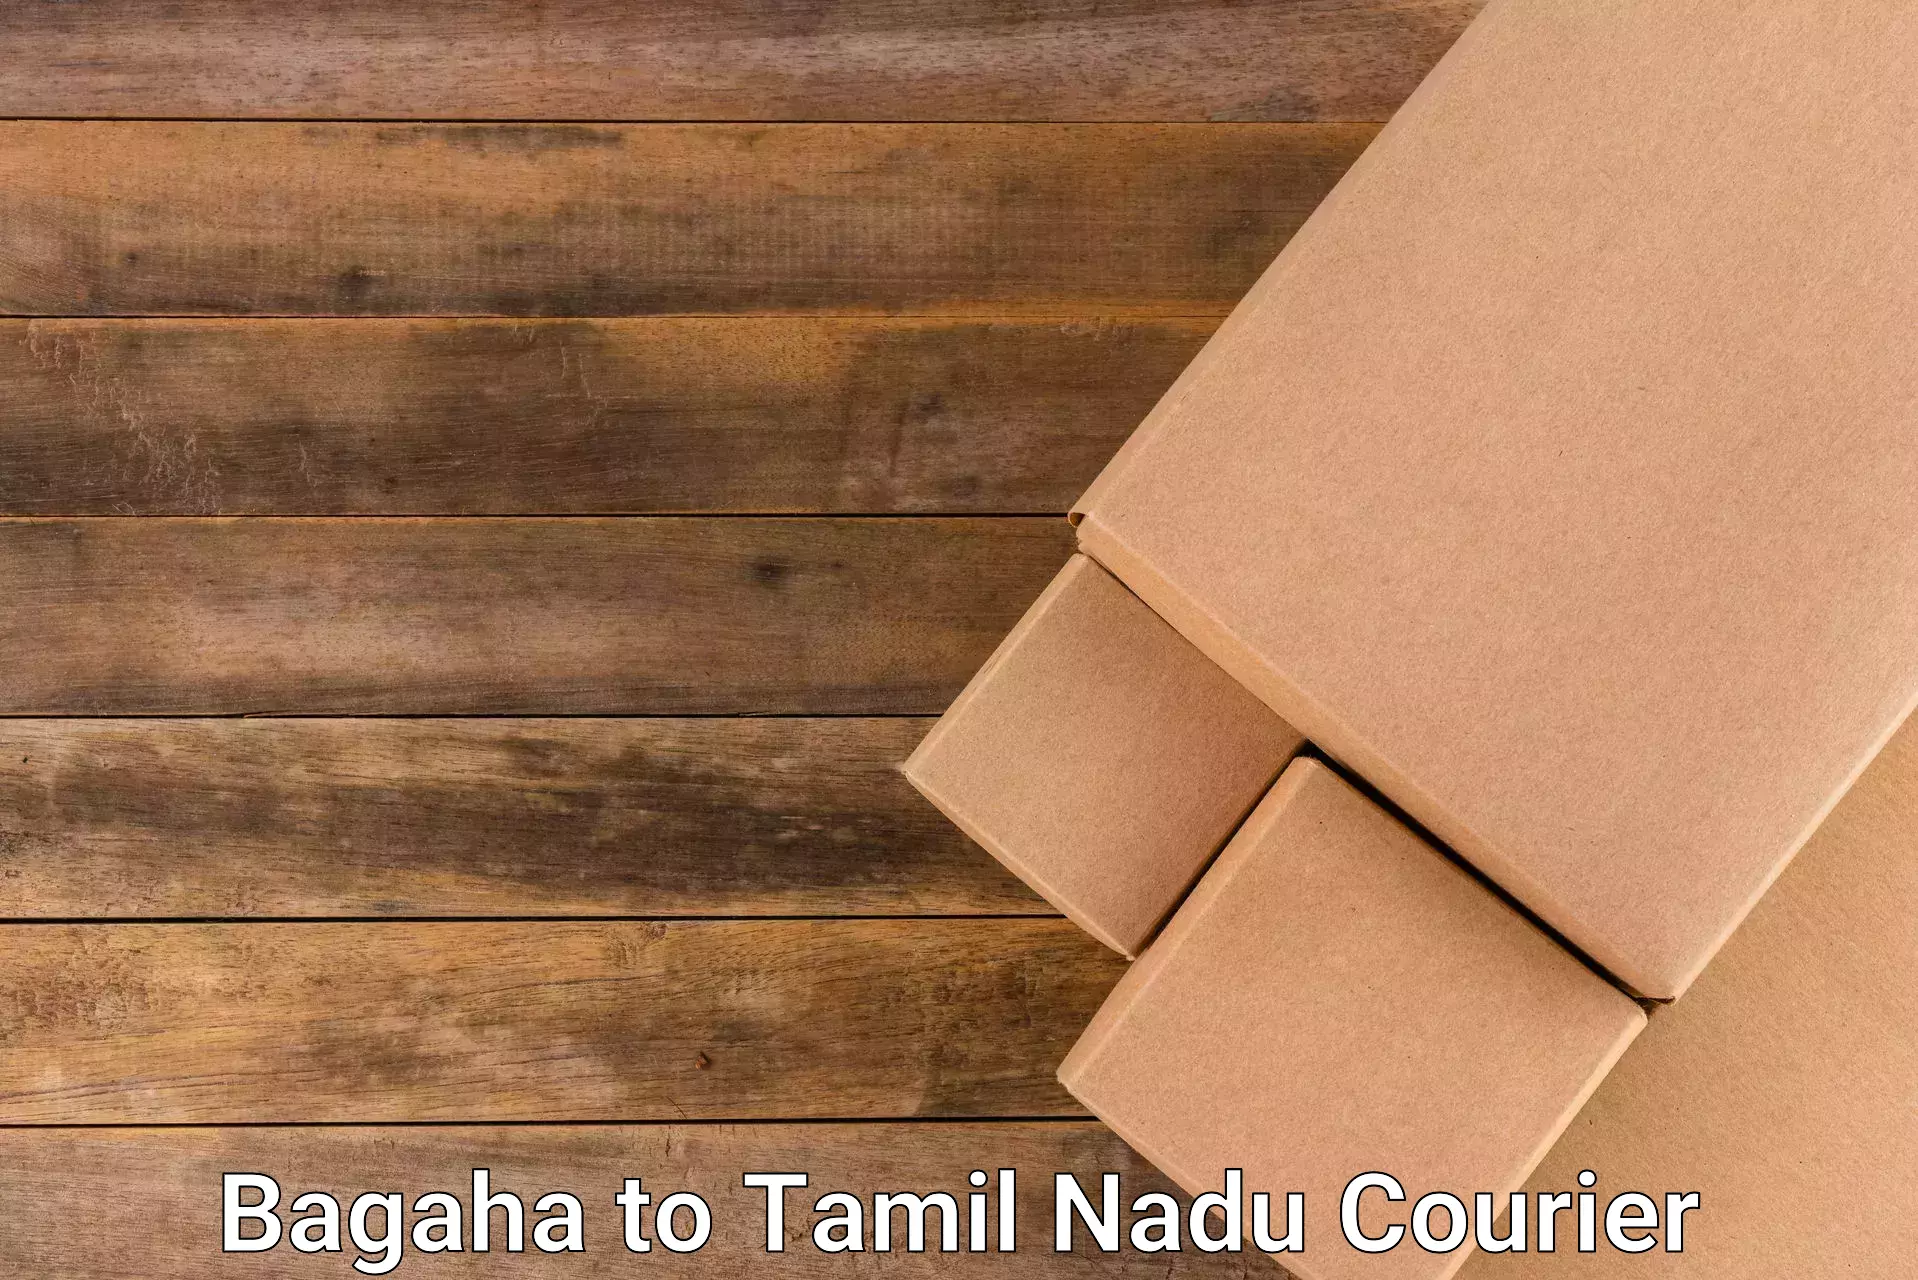 Courier services Bagaha to Tuticorin Port